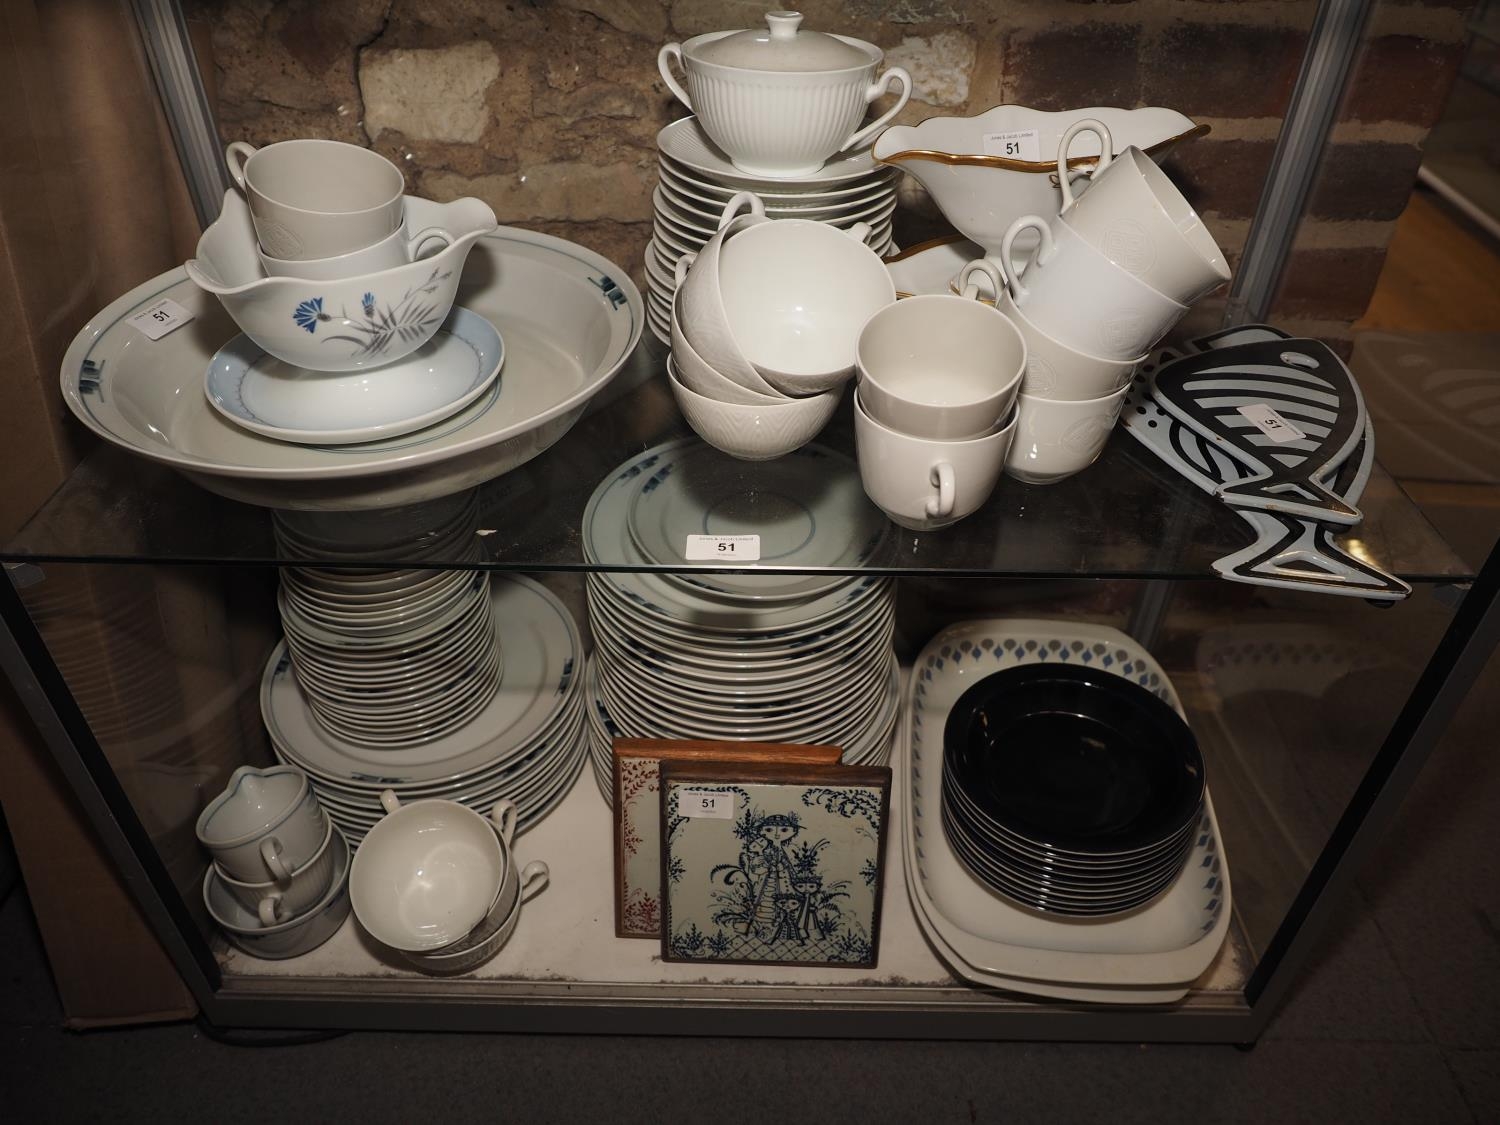 A Royal Copenhagen blue and white part dinner service and a quantity of other Danish china tableware - Image 3 of 3